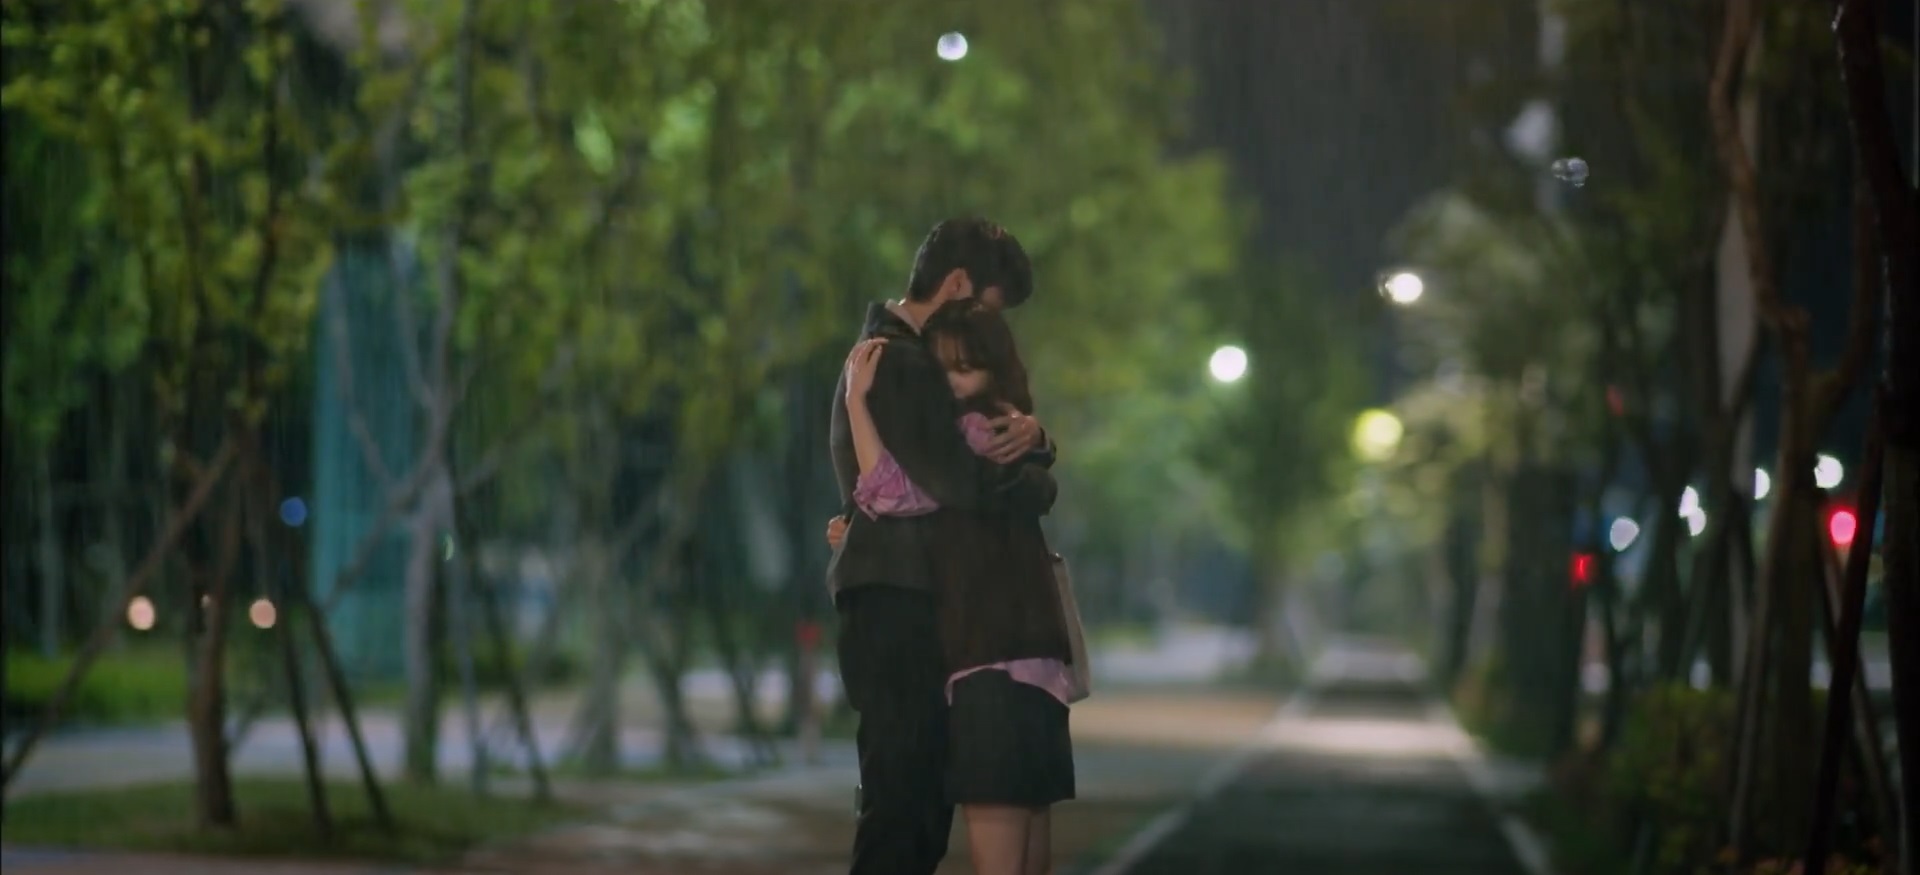 doom at your service finale - dong-kyung and myul mang embracing